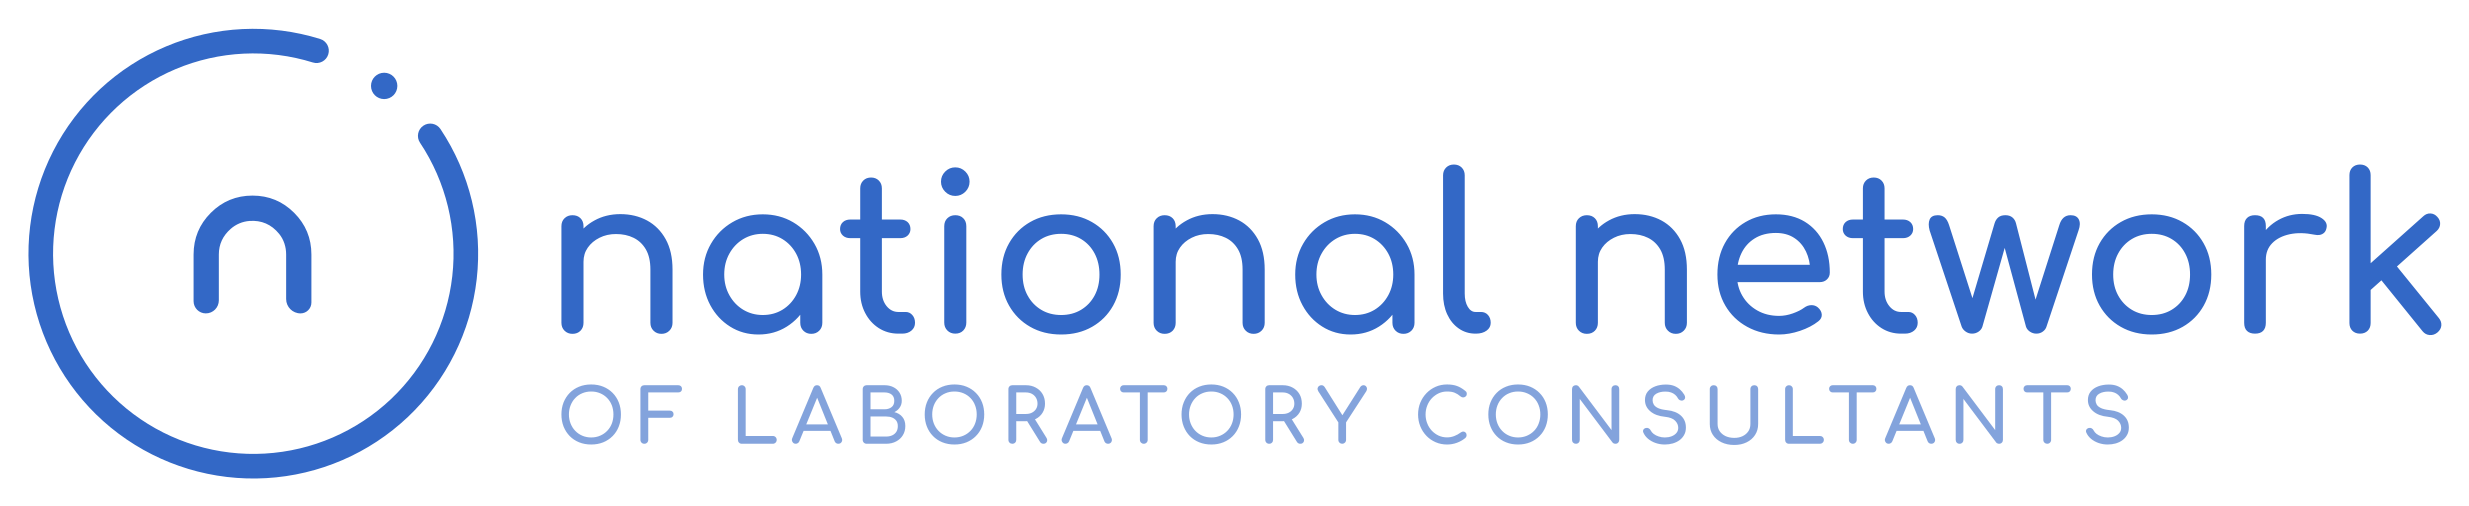 National Network of Laboratory Consultants